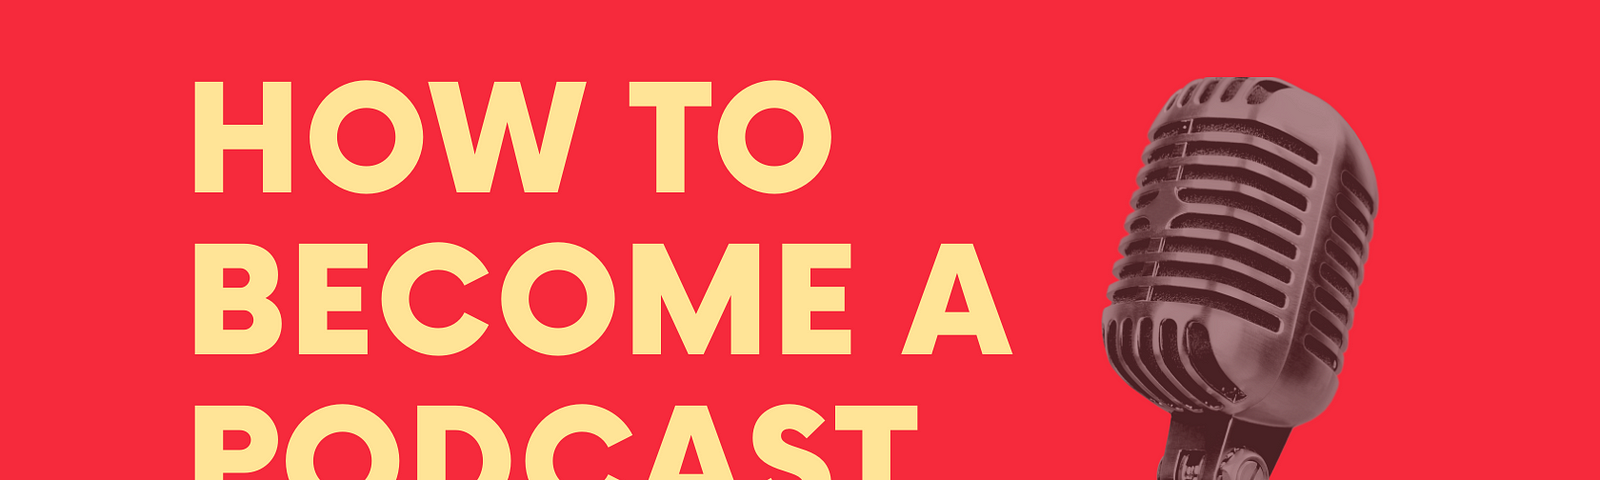 becoming a guest on podcast, podcast search, podcast list, guest podcast, being guest on podcast, how to get podcast guest